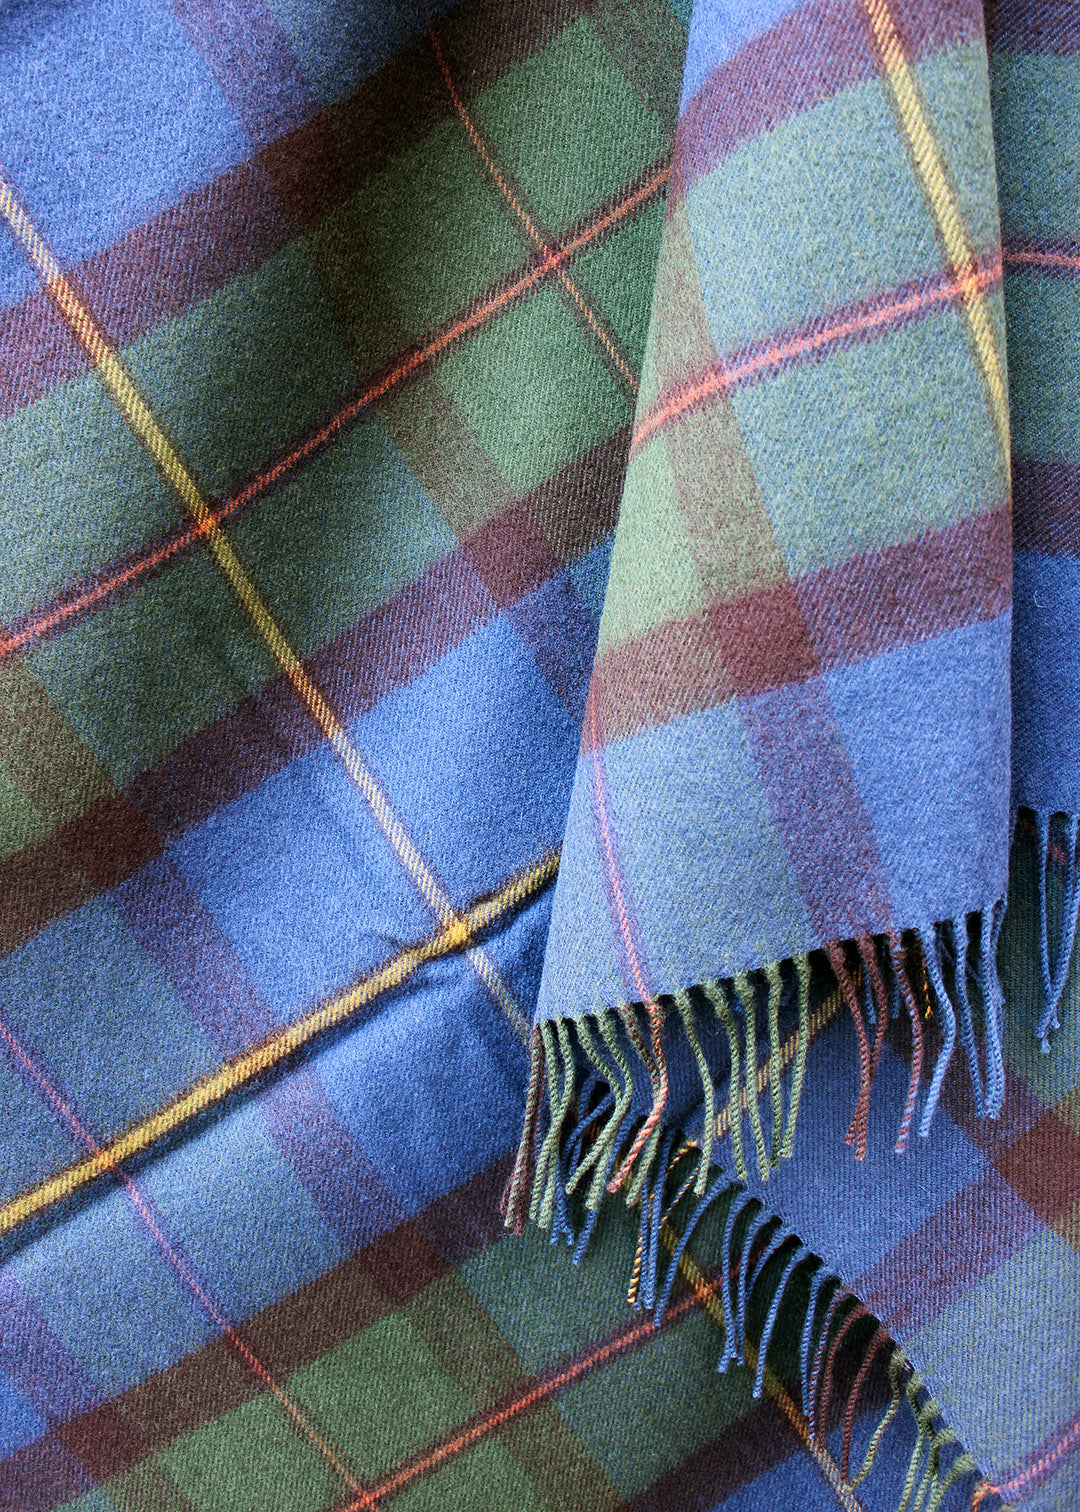 Lambswool tartan blanket in the blues, greens and browns of the Macleod of Harris tartan. Made in the Scottish Borders. Scottish Textiles Showcase.